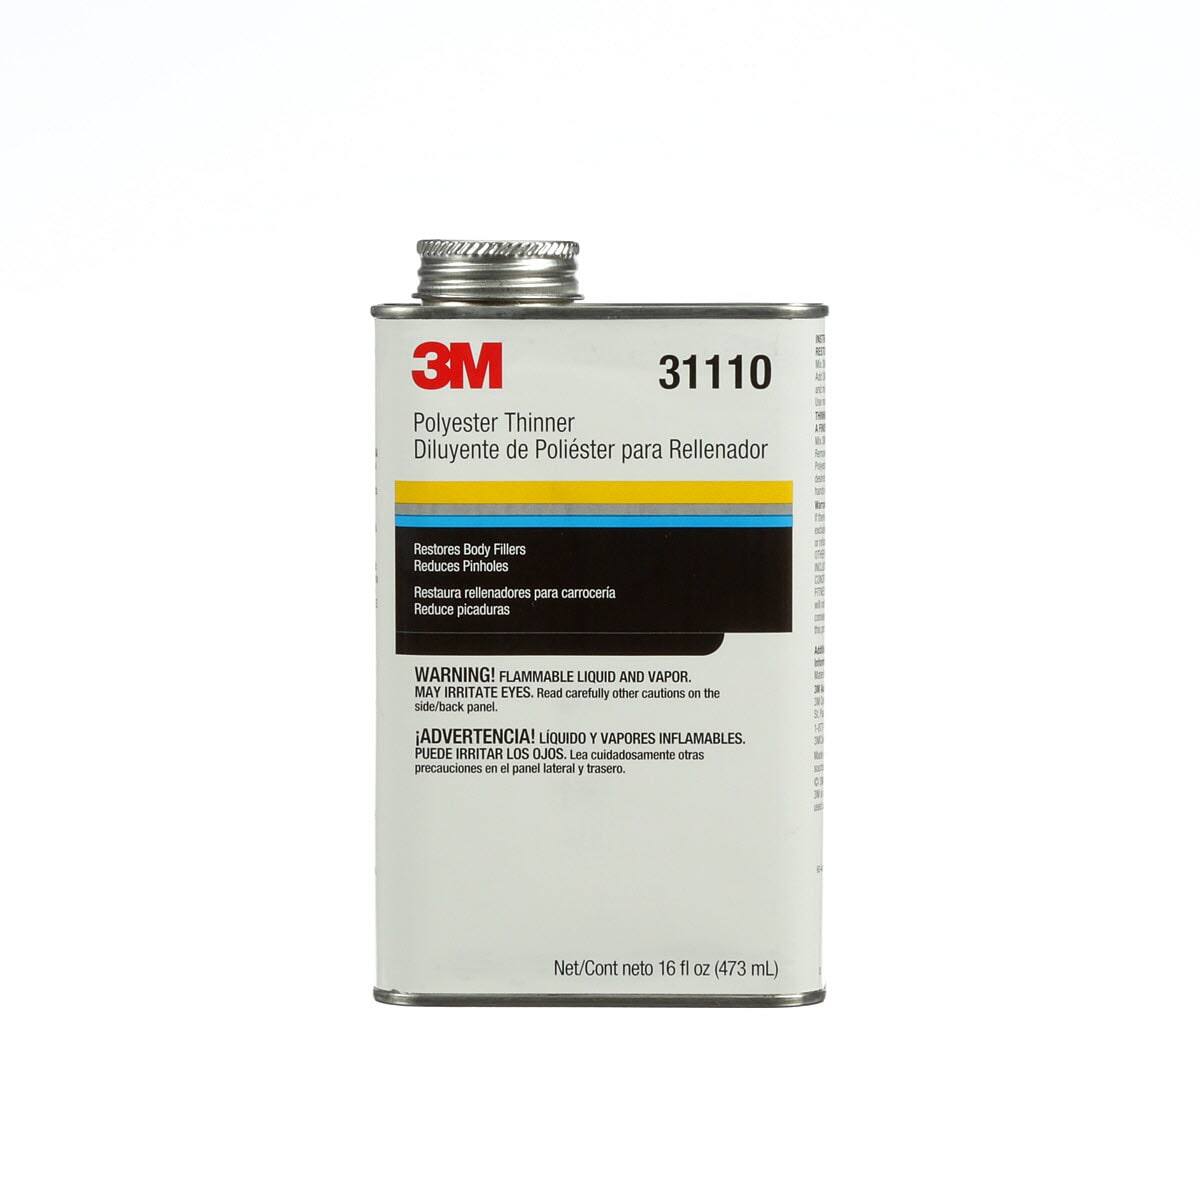 3M 7000119893 Flammable Ready-to-Use Thinner, 1 pt Container Can Container, Liquid Form, Purplish to Brownish, Pungent Odor/Scent